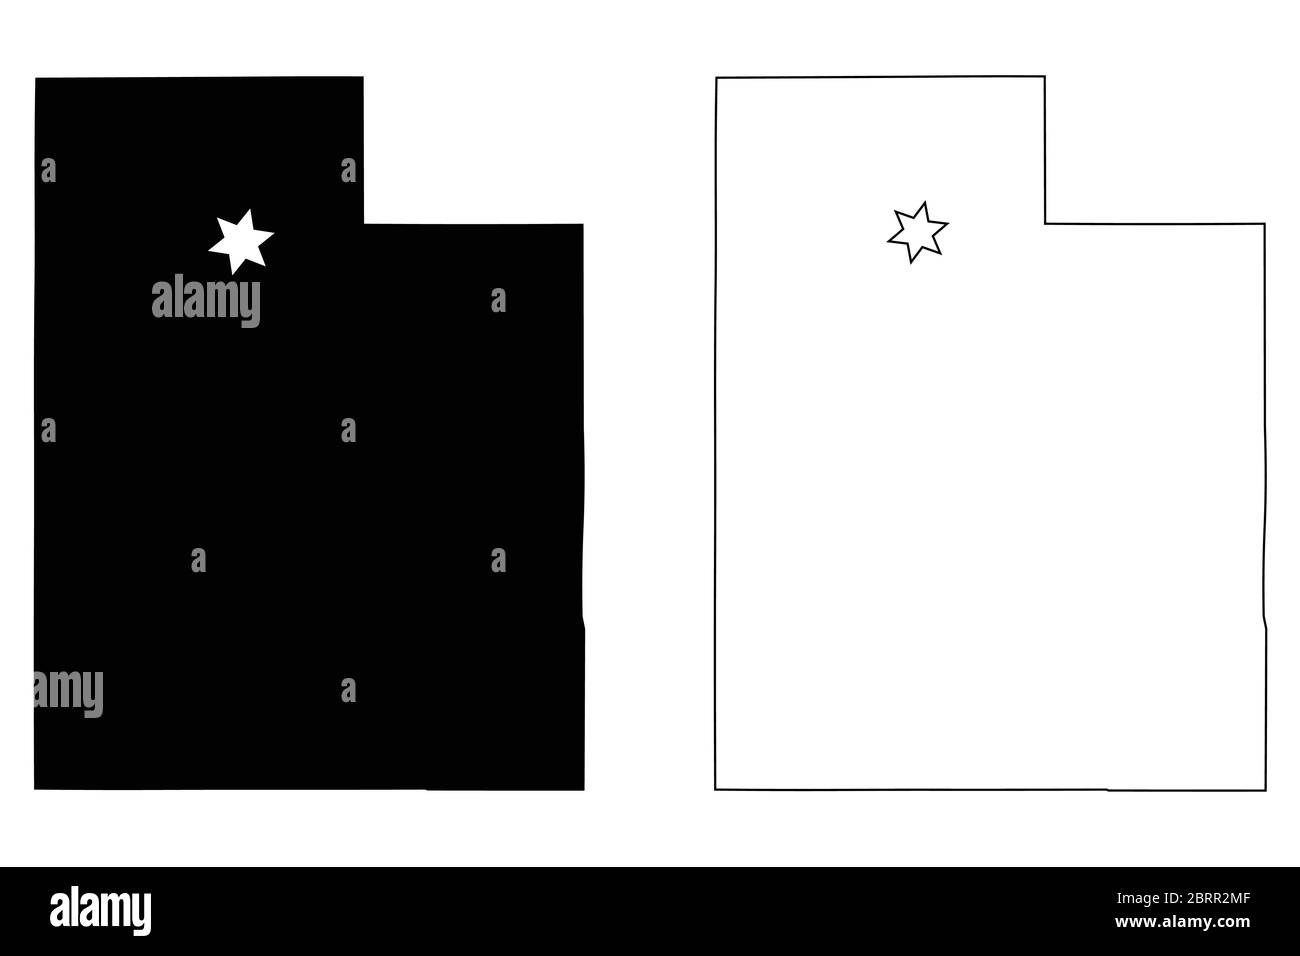 Utah UT state Map USA with Capital City Star at Salt Lake City. Black silhouette and outline isolated maps on a white background. EPS Vector Stock Vector